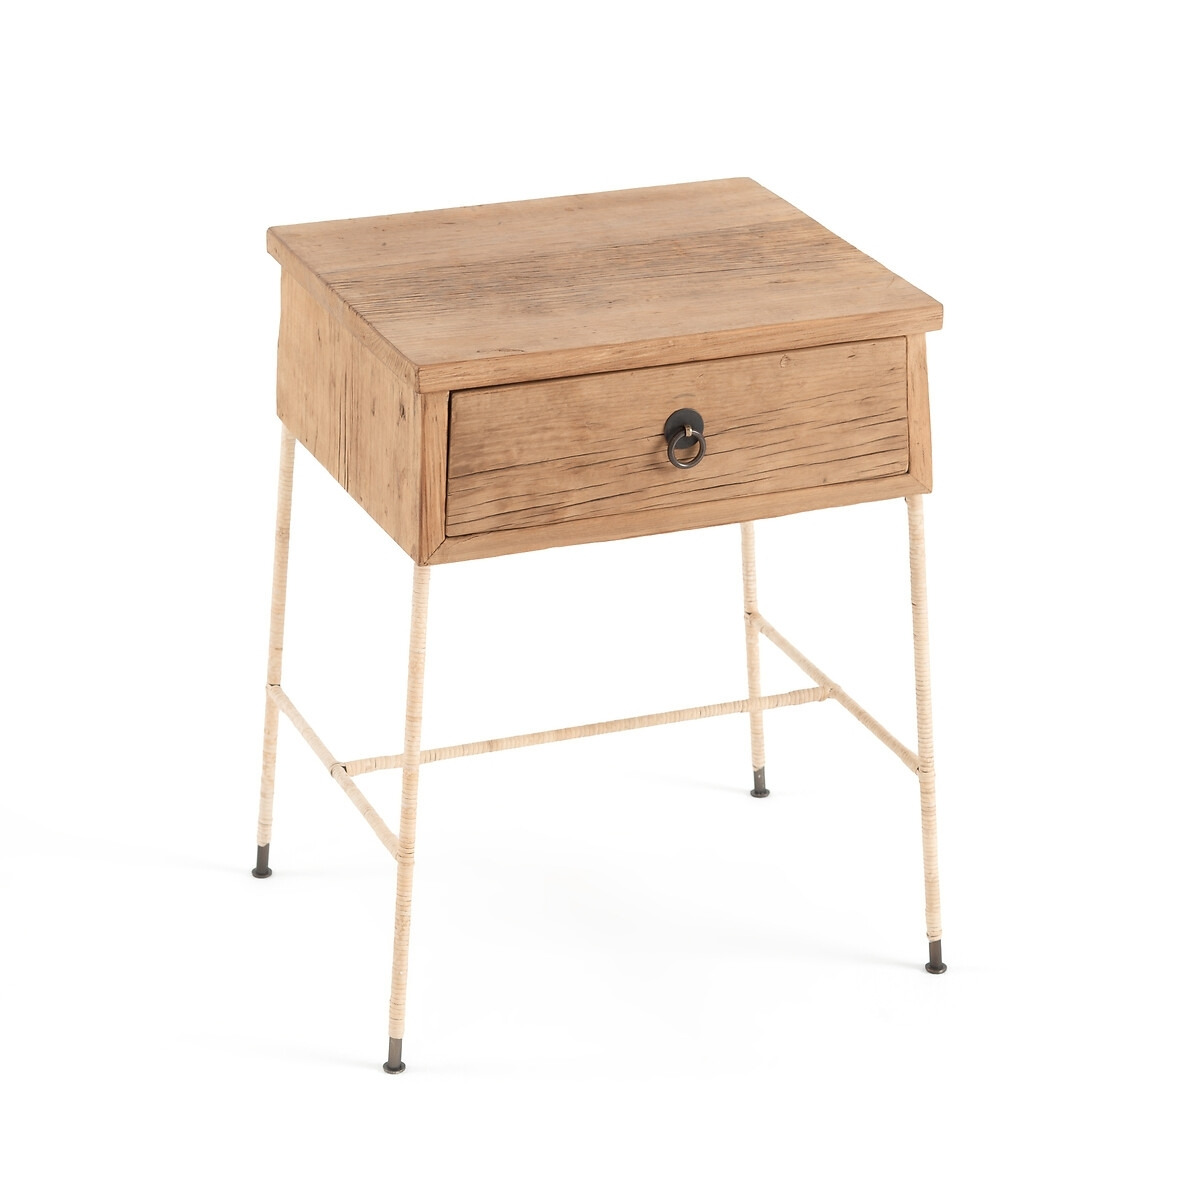 Sumiko Recycled Solid Elm Bedside Table - image 1